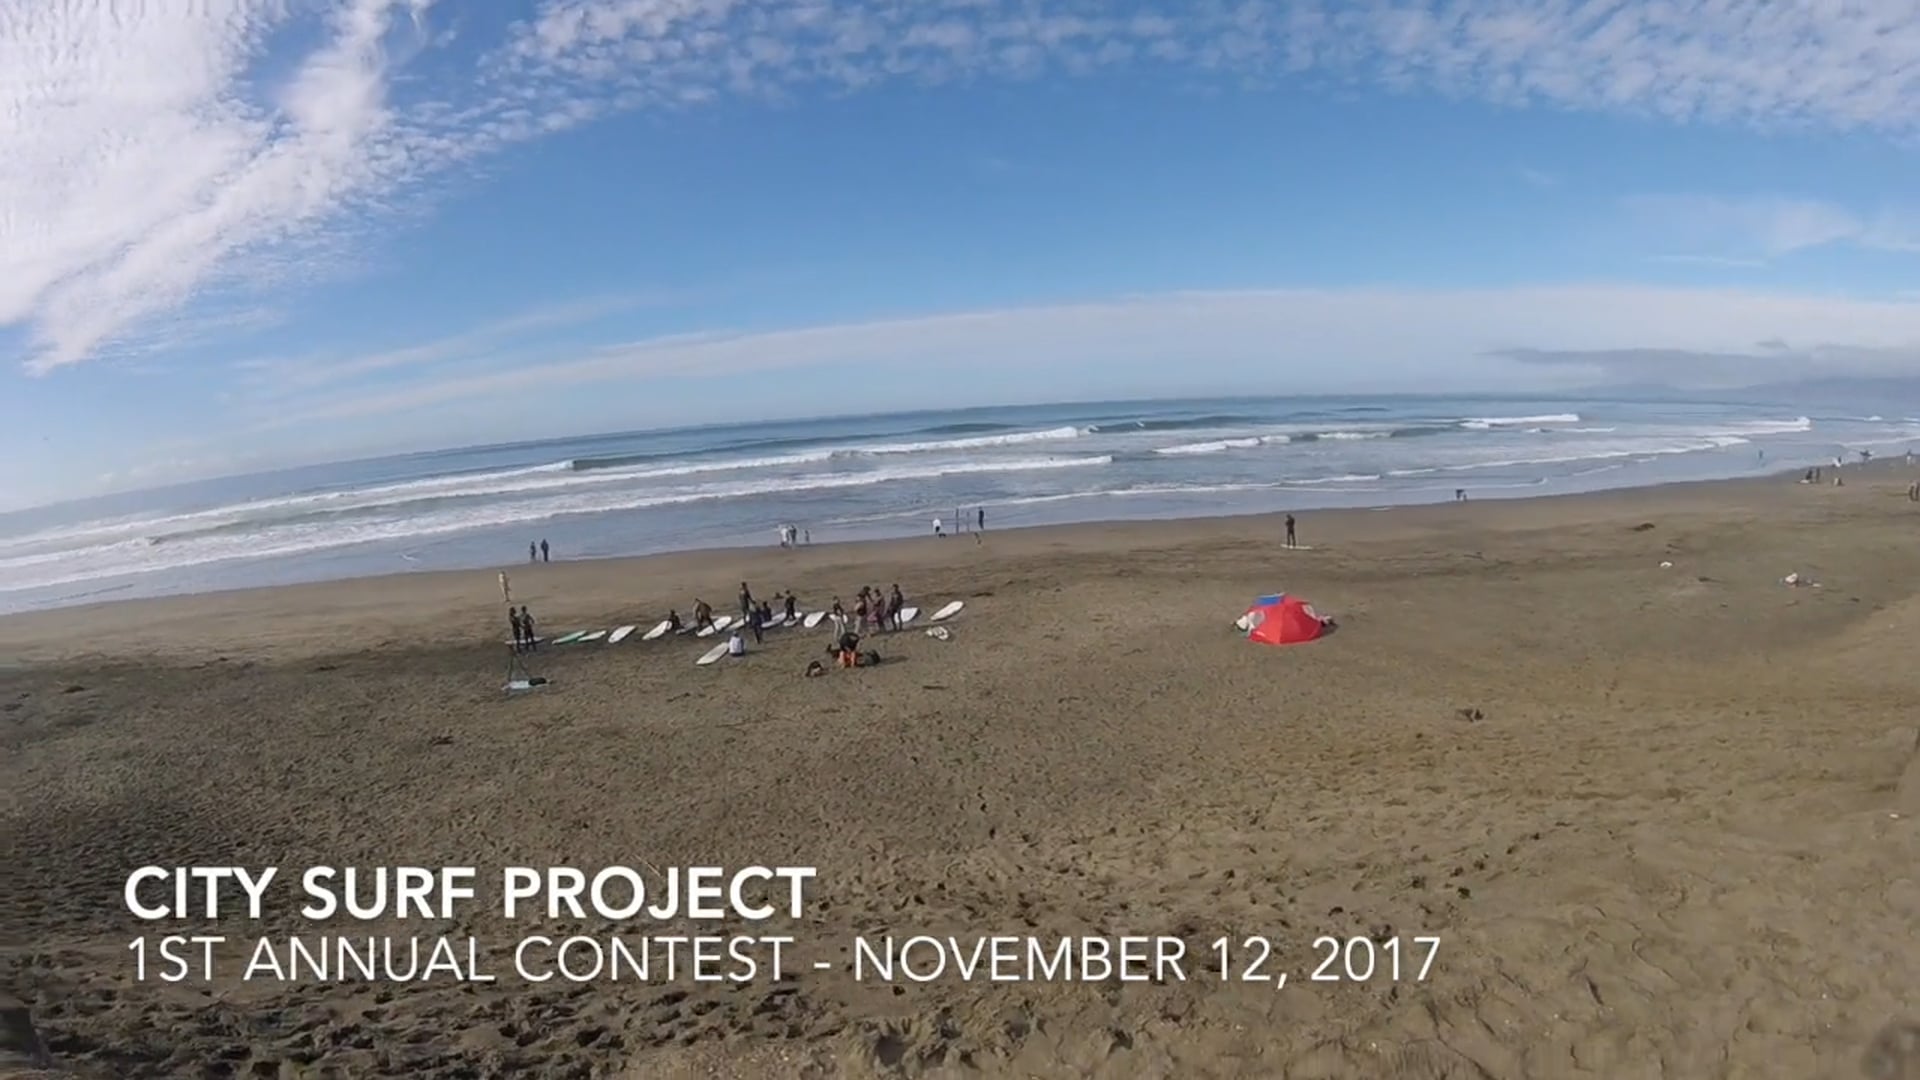 City Surf Project Contest, November 12, 2017.